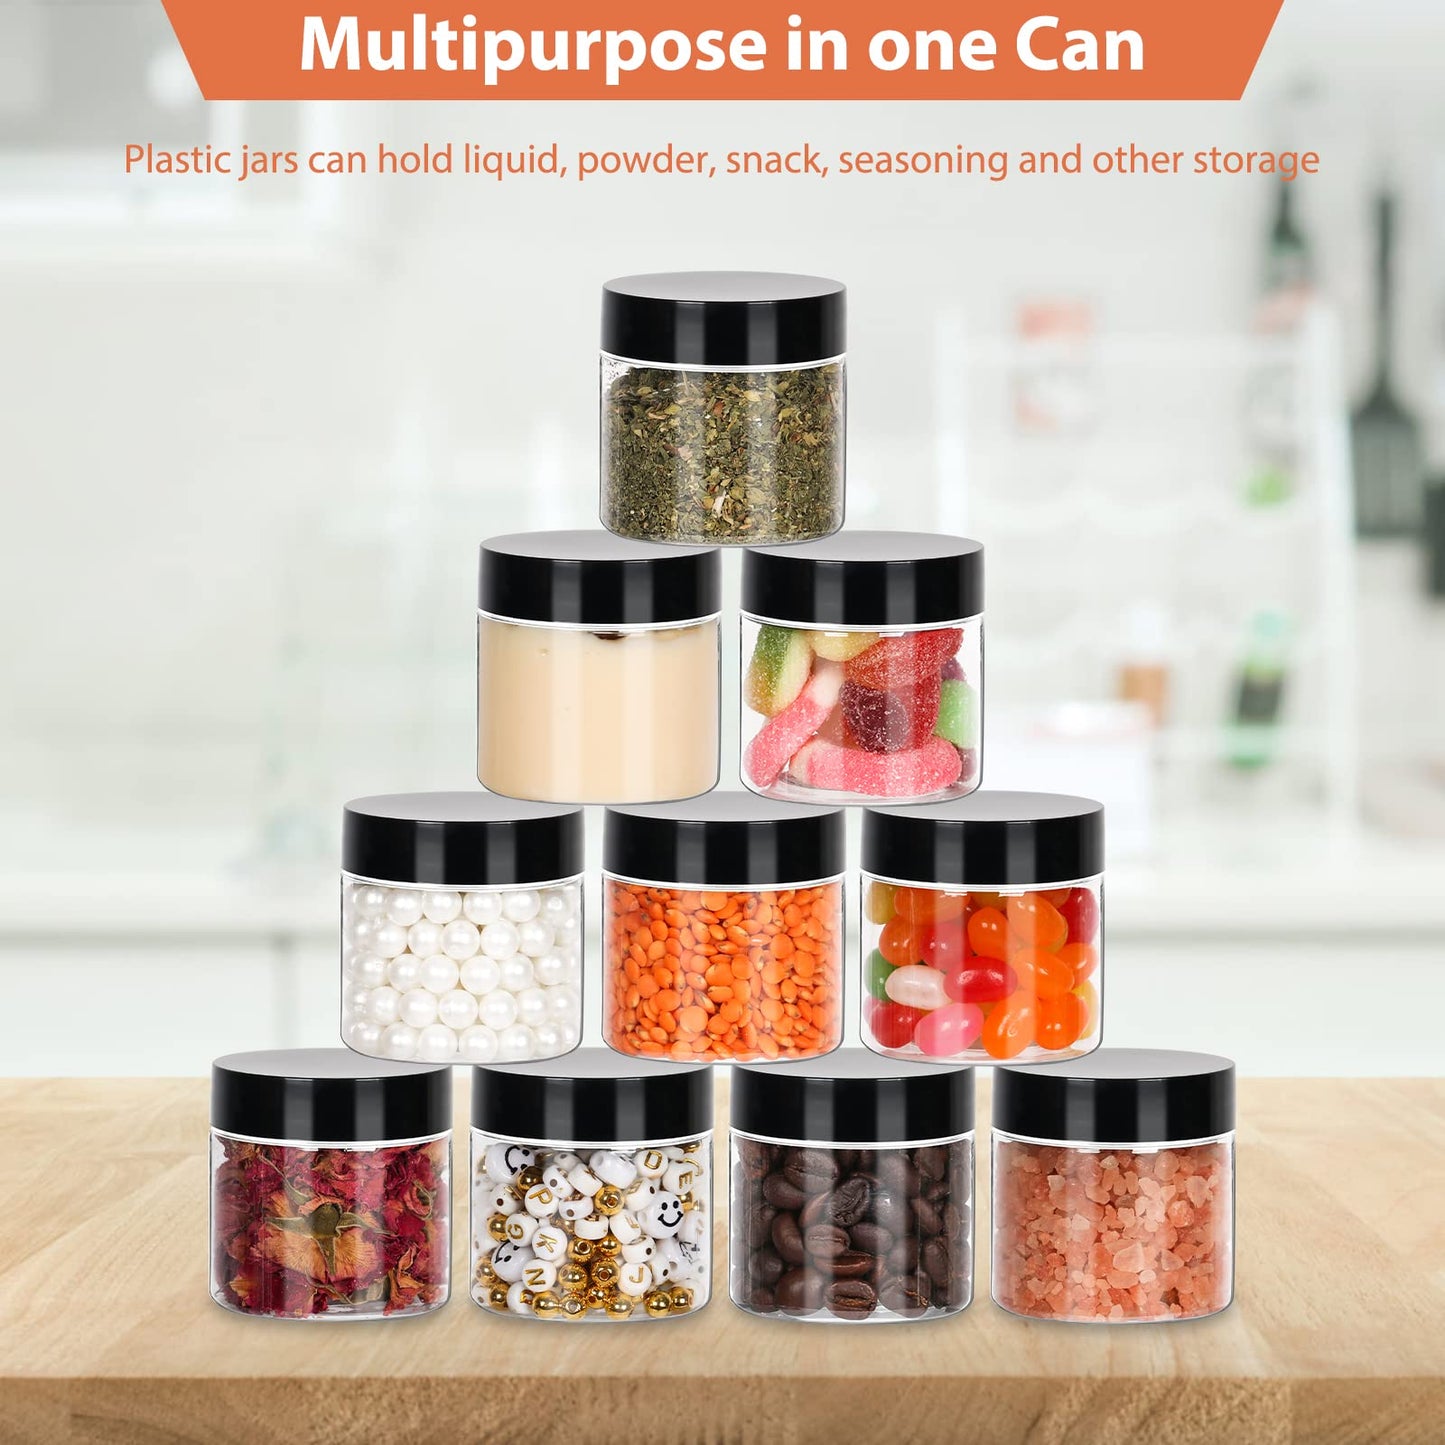 50pcs 2 oz Clear Plastic Round Jars with Black Lids, 2oz 60ml Leak-Proof Wide-Mouth Cosmetic Storage Containers for Kitchen Use, Beauty Products, Cream, Scrubs, Bath Salt and More